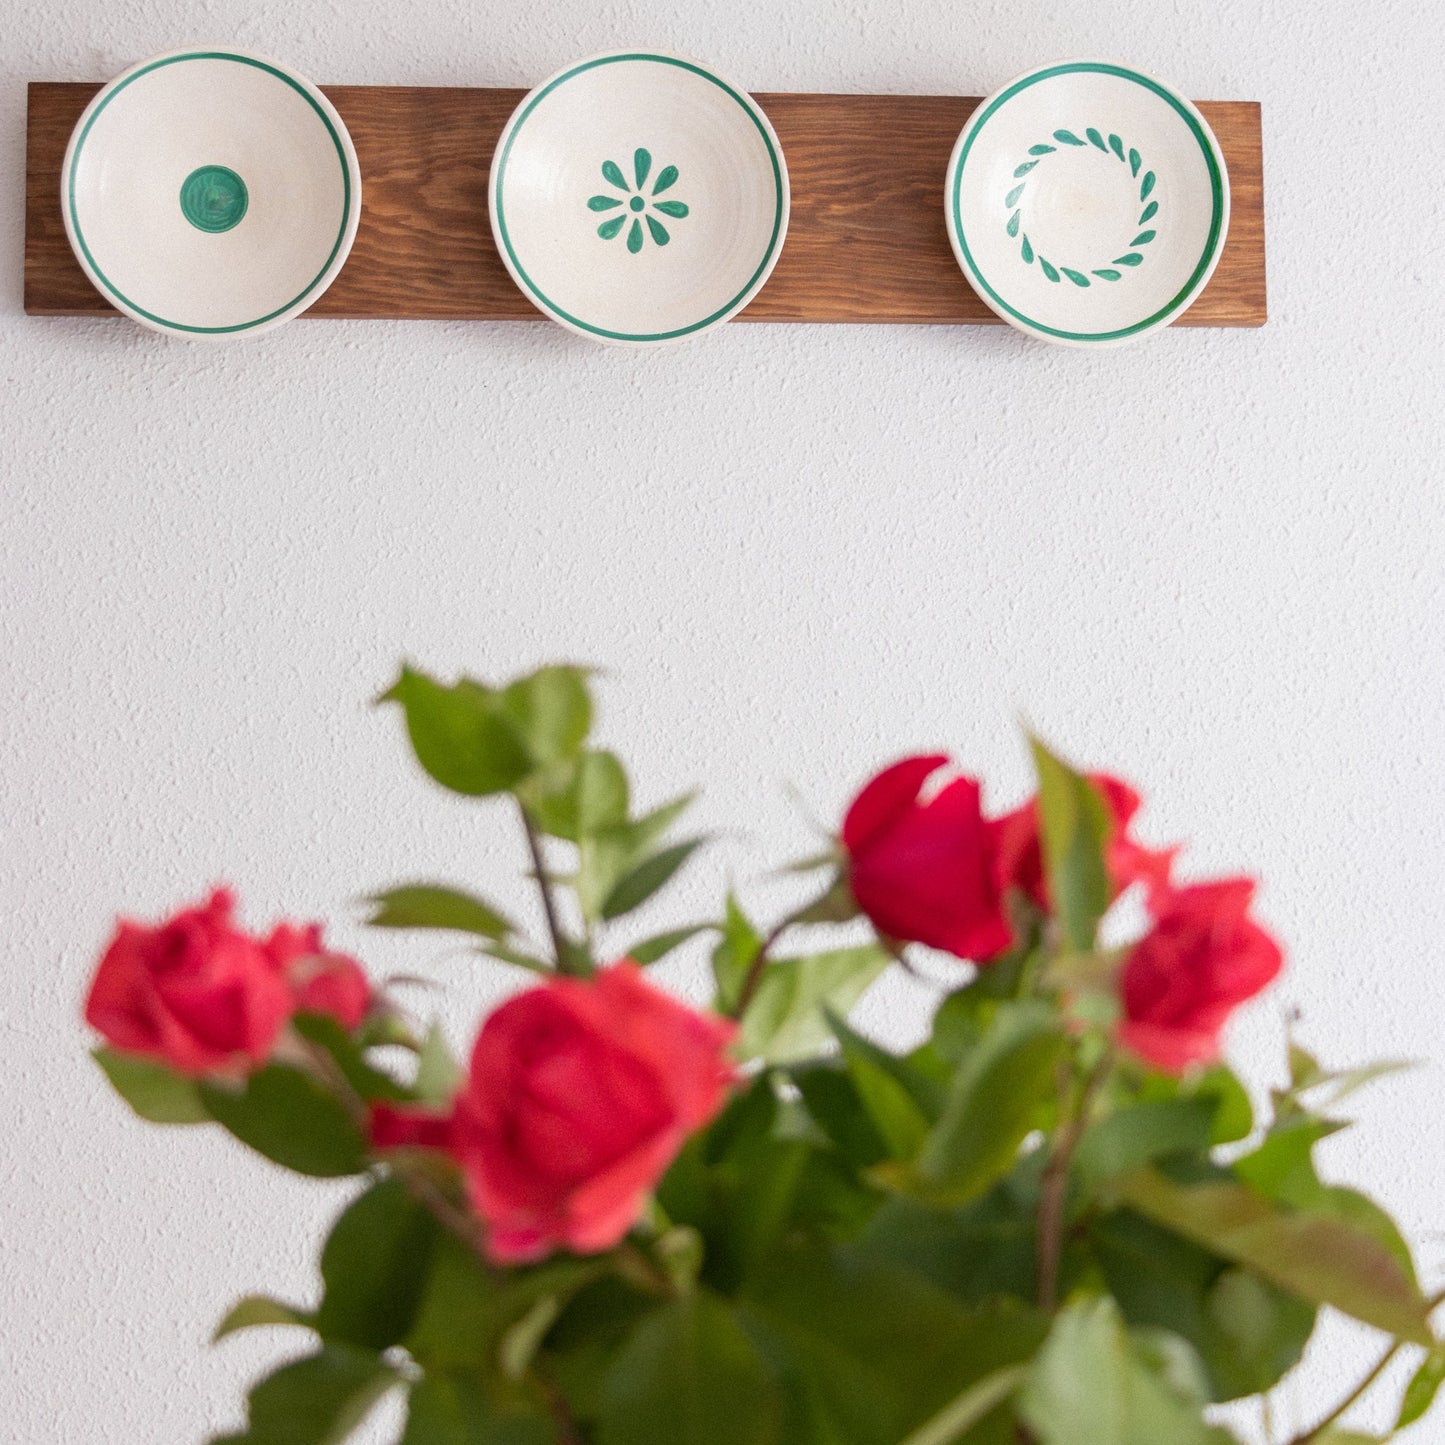 Wall plates | Decorative plates for exterior or interior wall